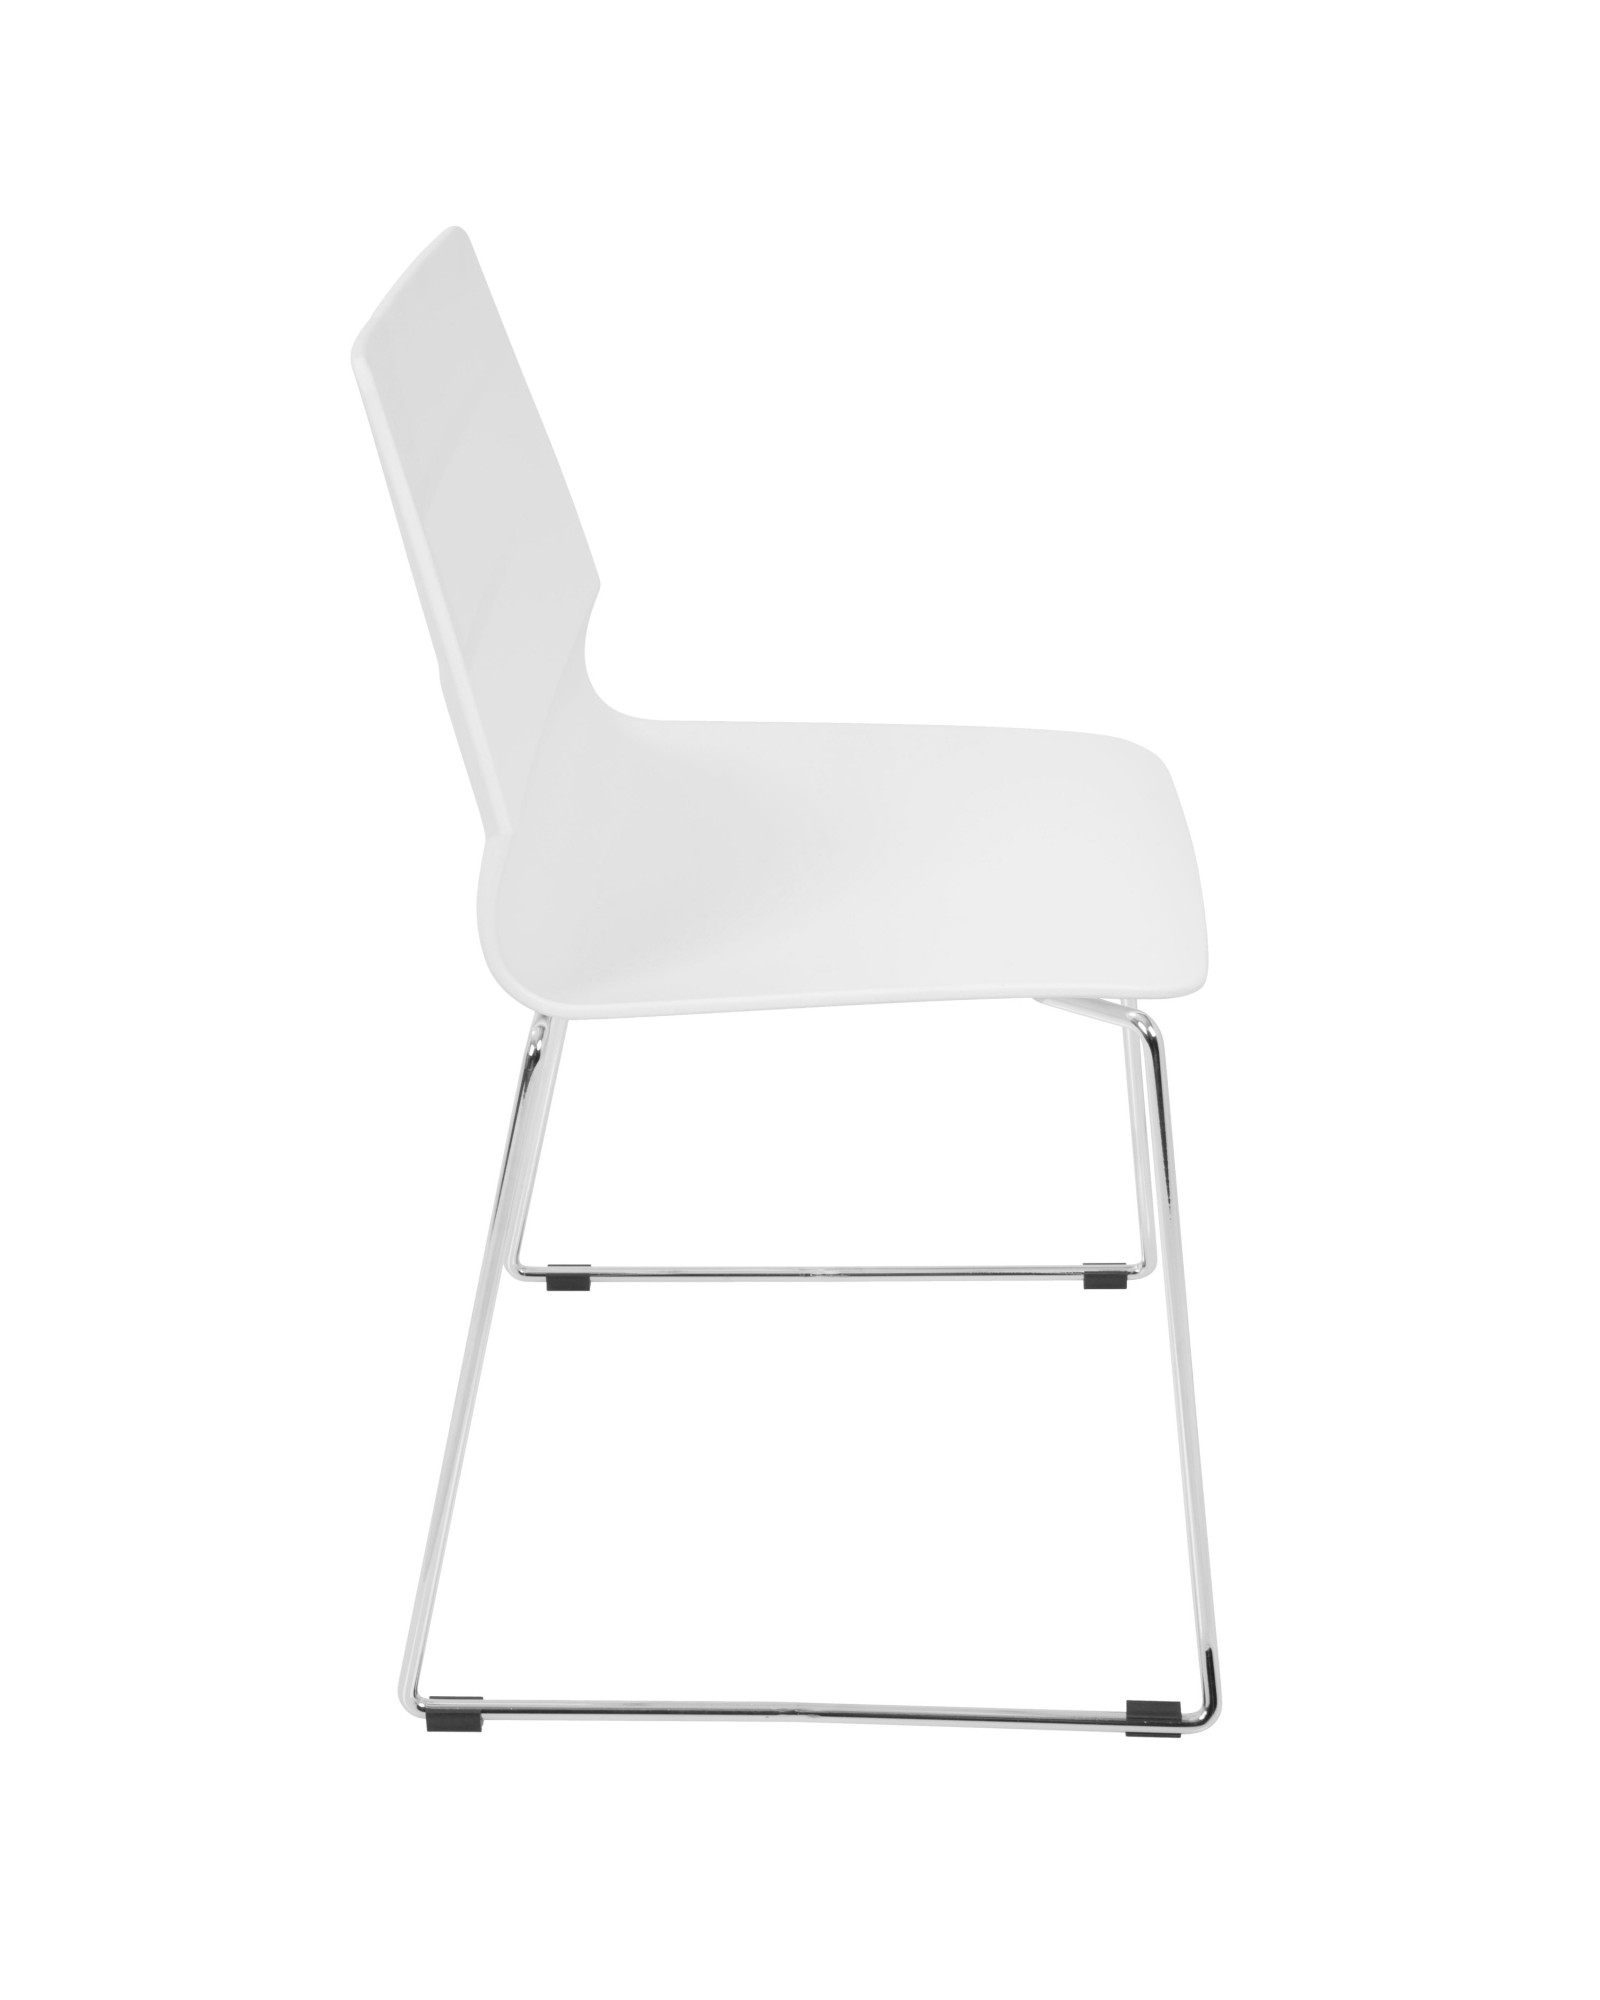 Arrow Contemporary Dining Chair in White - Set of 2